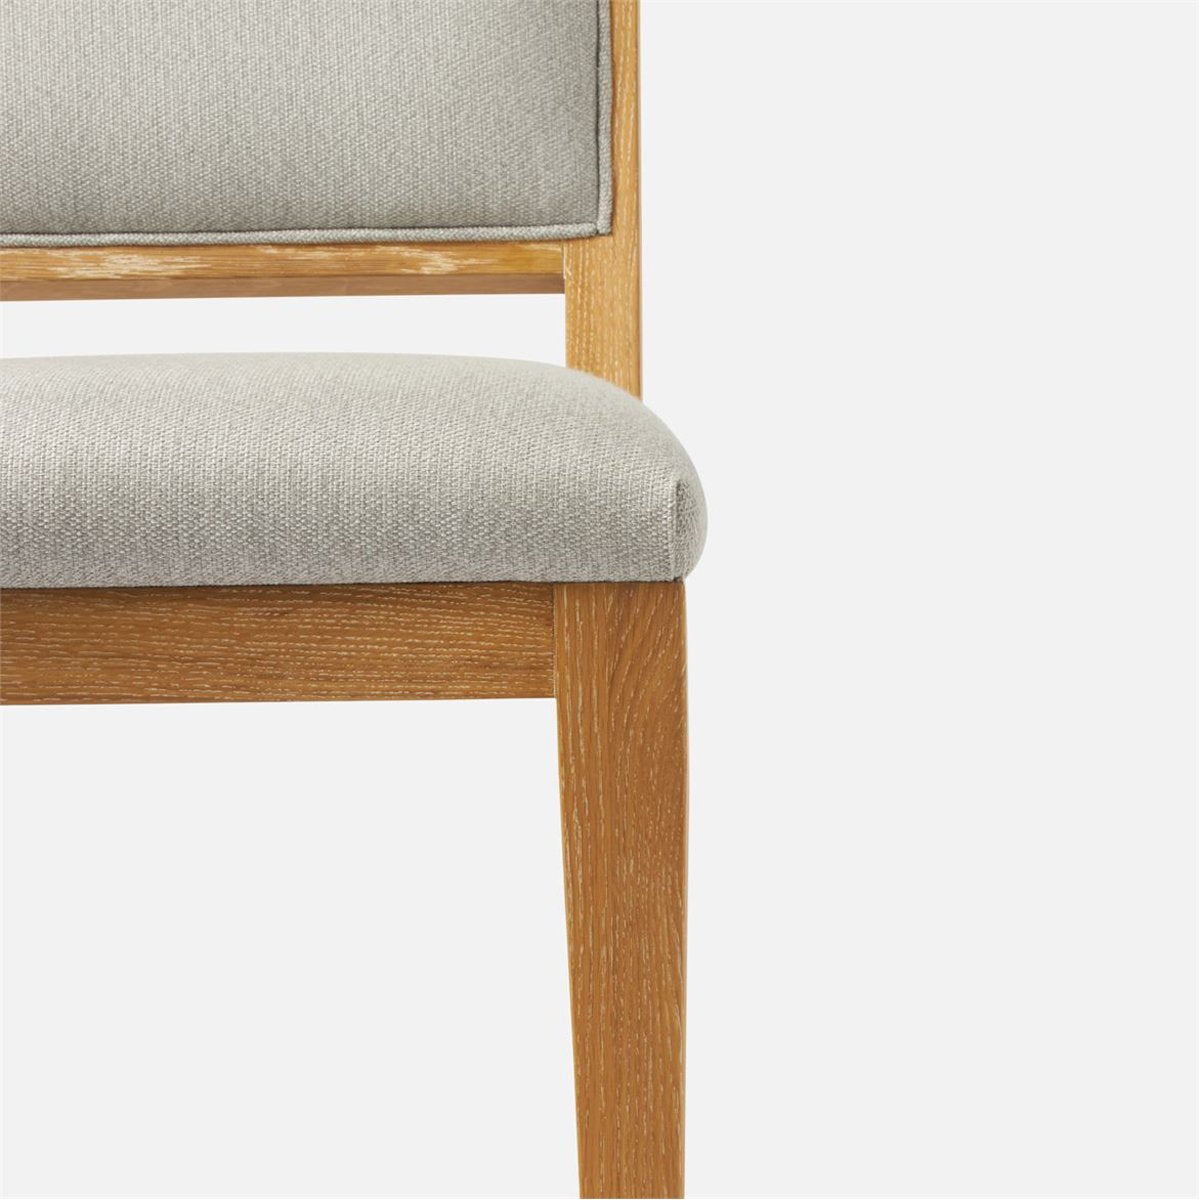 Made Goods Salem Upholstered Dining Chair in Garonne Leather